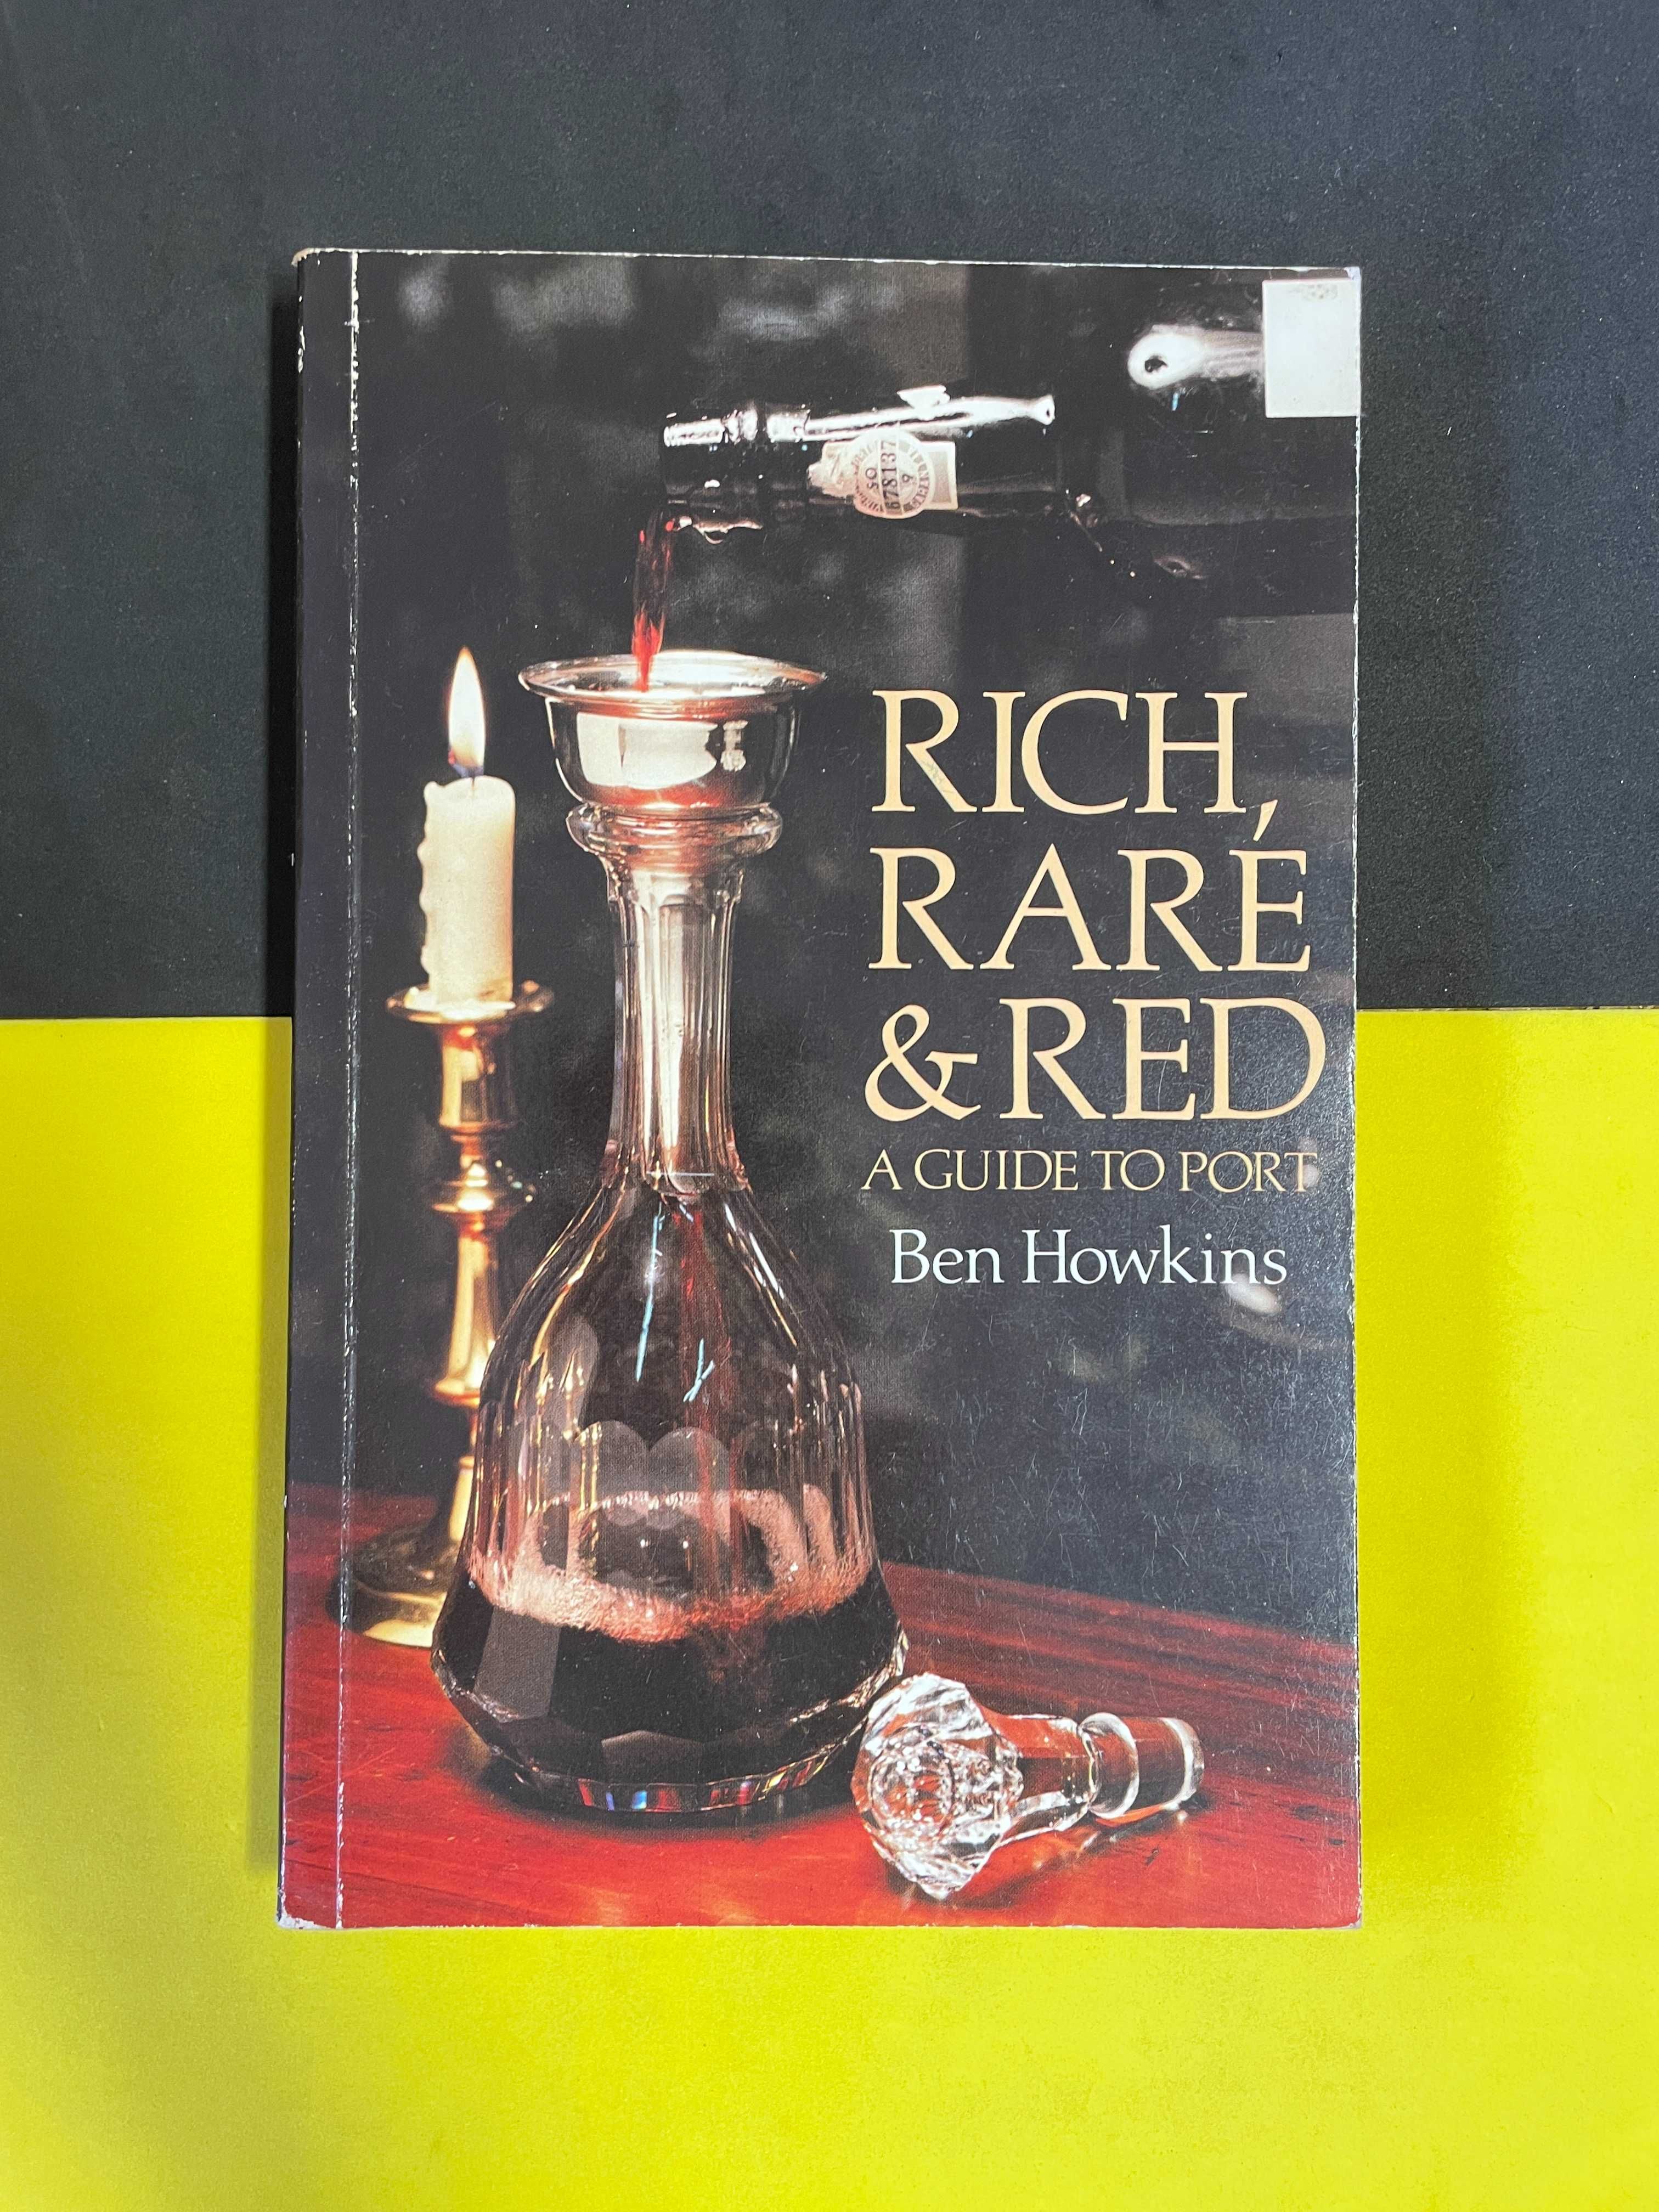 Ben Howkins - Rich, Rare & Red: A Guide to Port